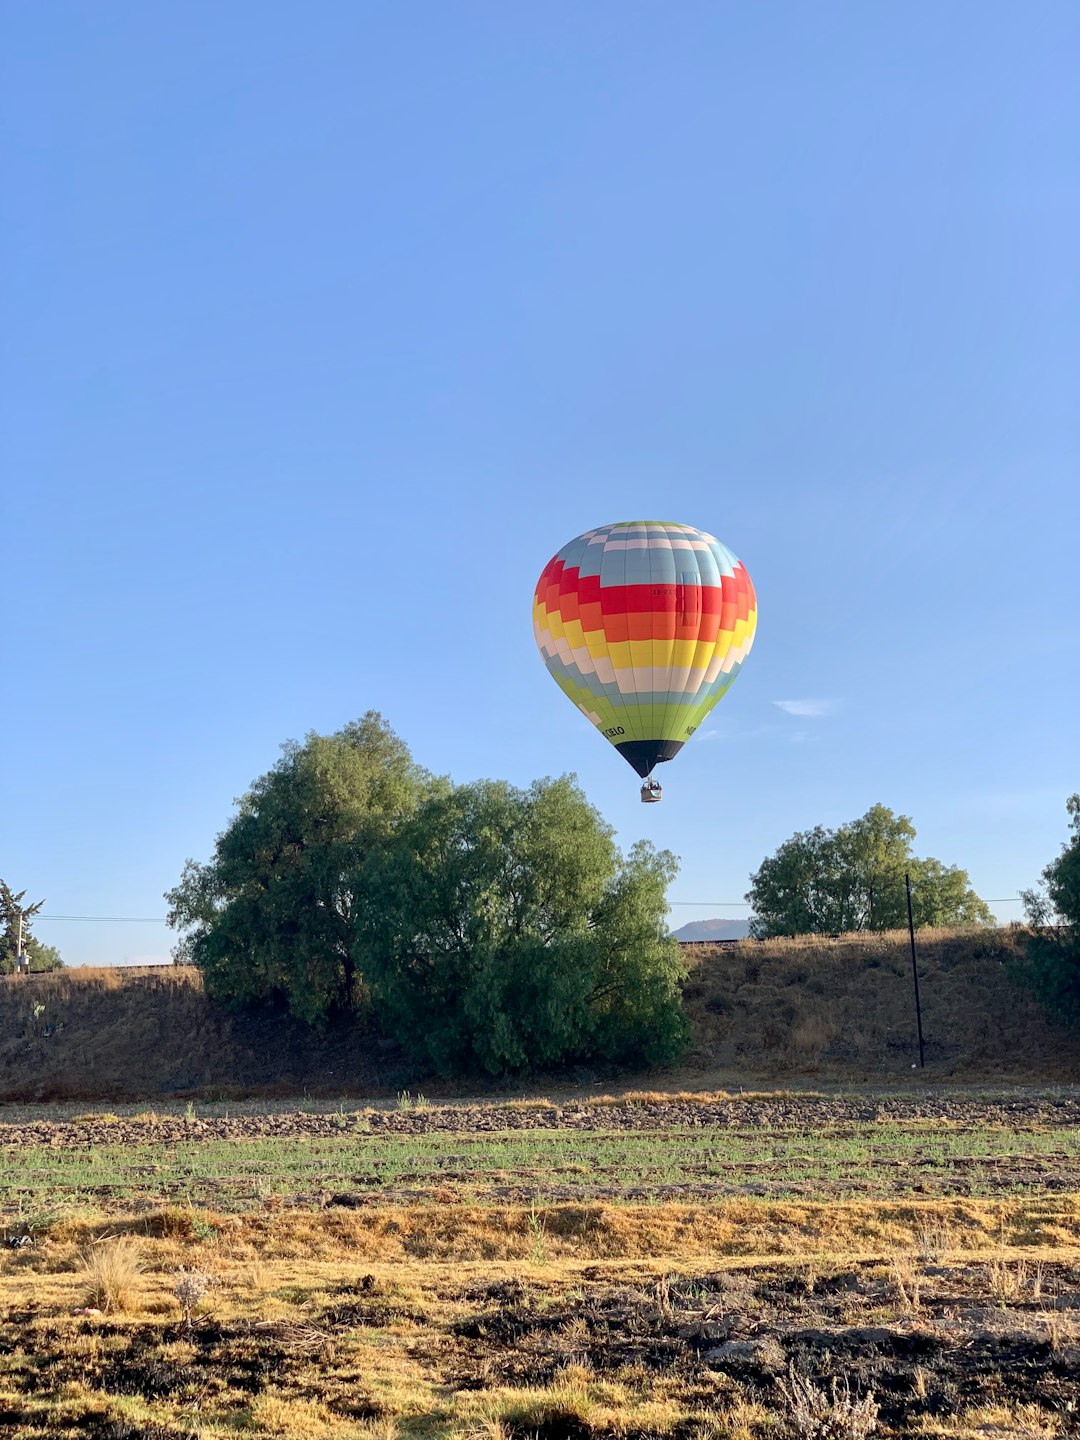 travelers stories about Hot air ballooning in Teotihuacan, Mexico